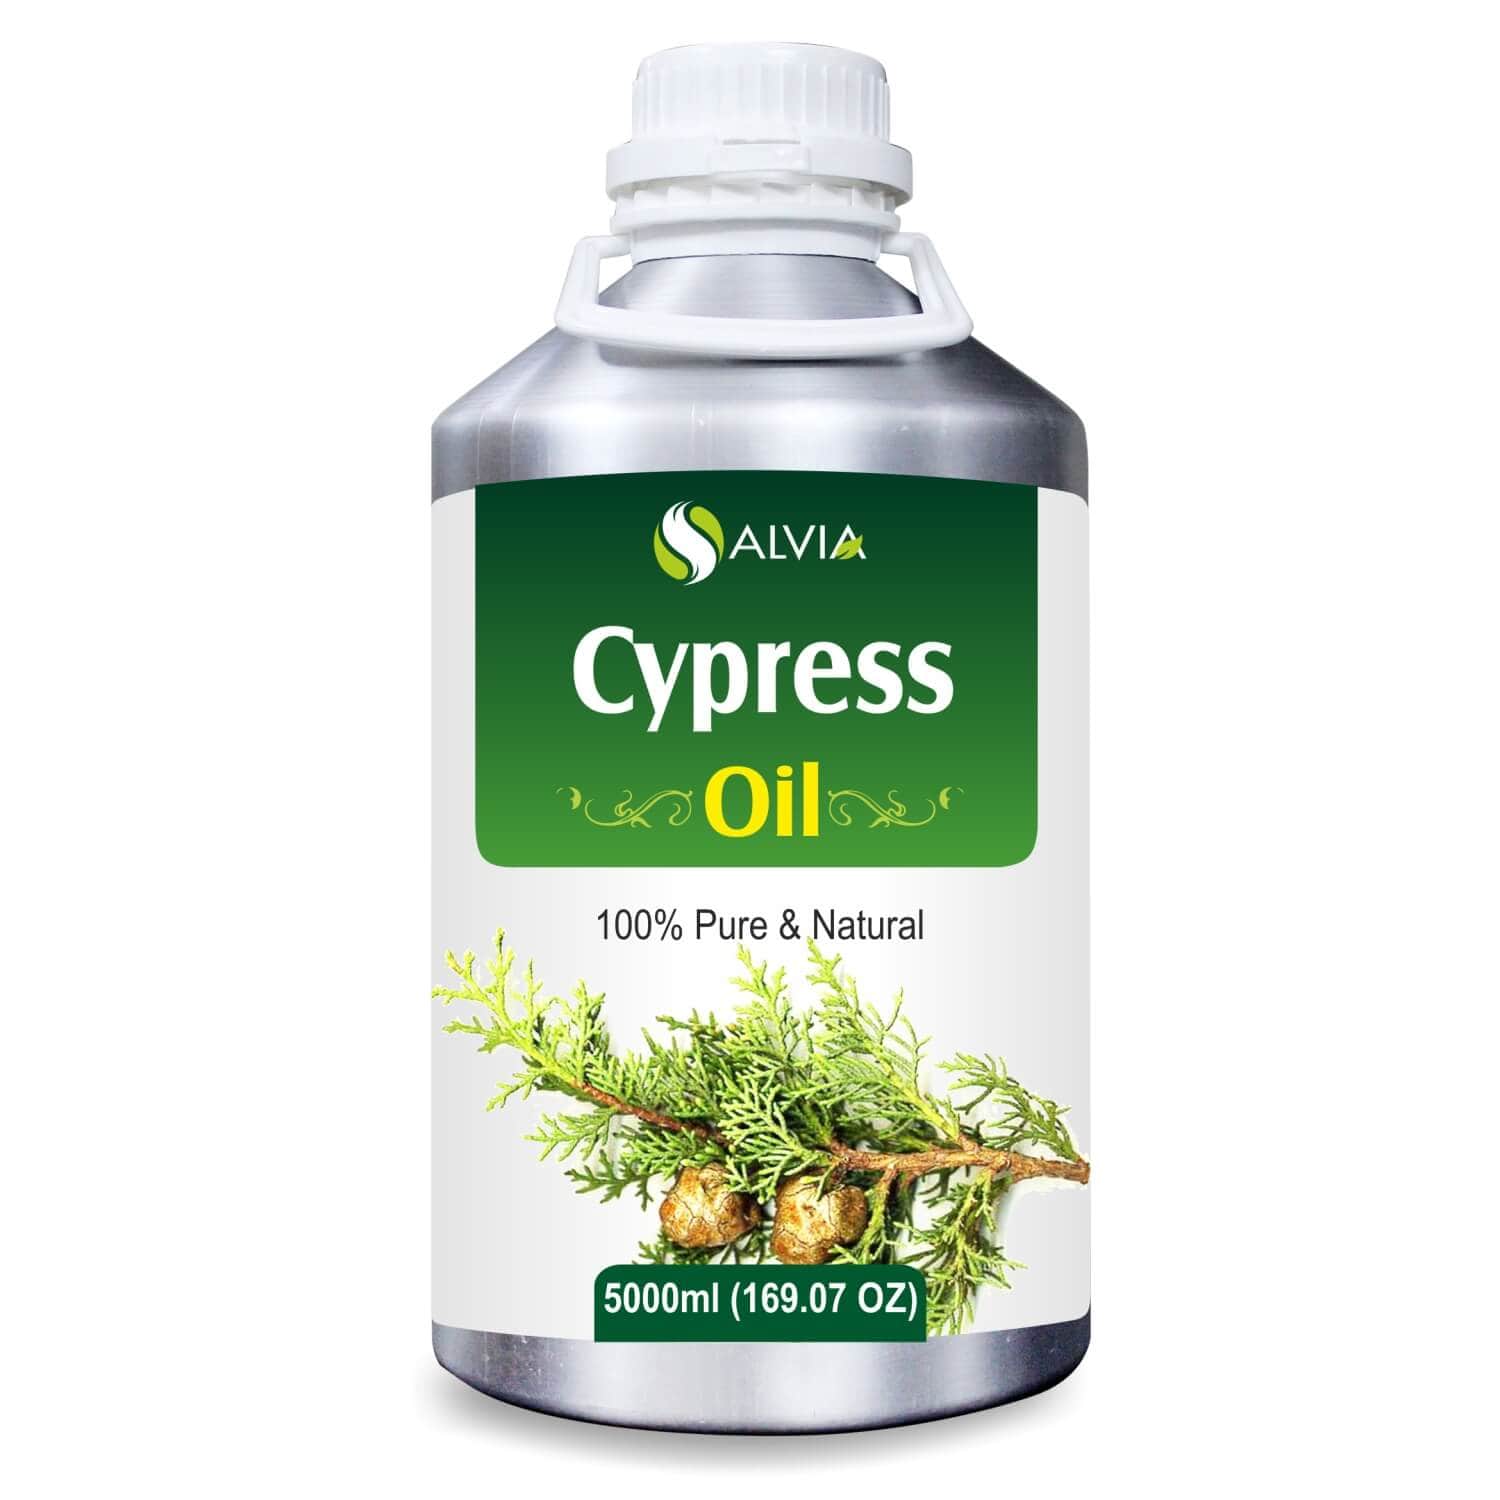 Salvia Natural Carrier Oils,Greasy Oil,Acne,Anti-acne Oil,Oil for Greasy hair 5000ml Cypress Oil (Cupressus sempervirens) 100% Natural Pure Essential Oil